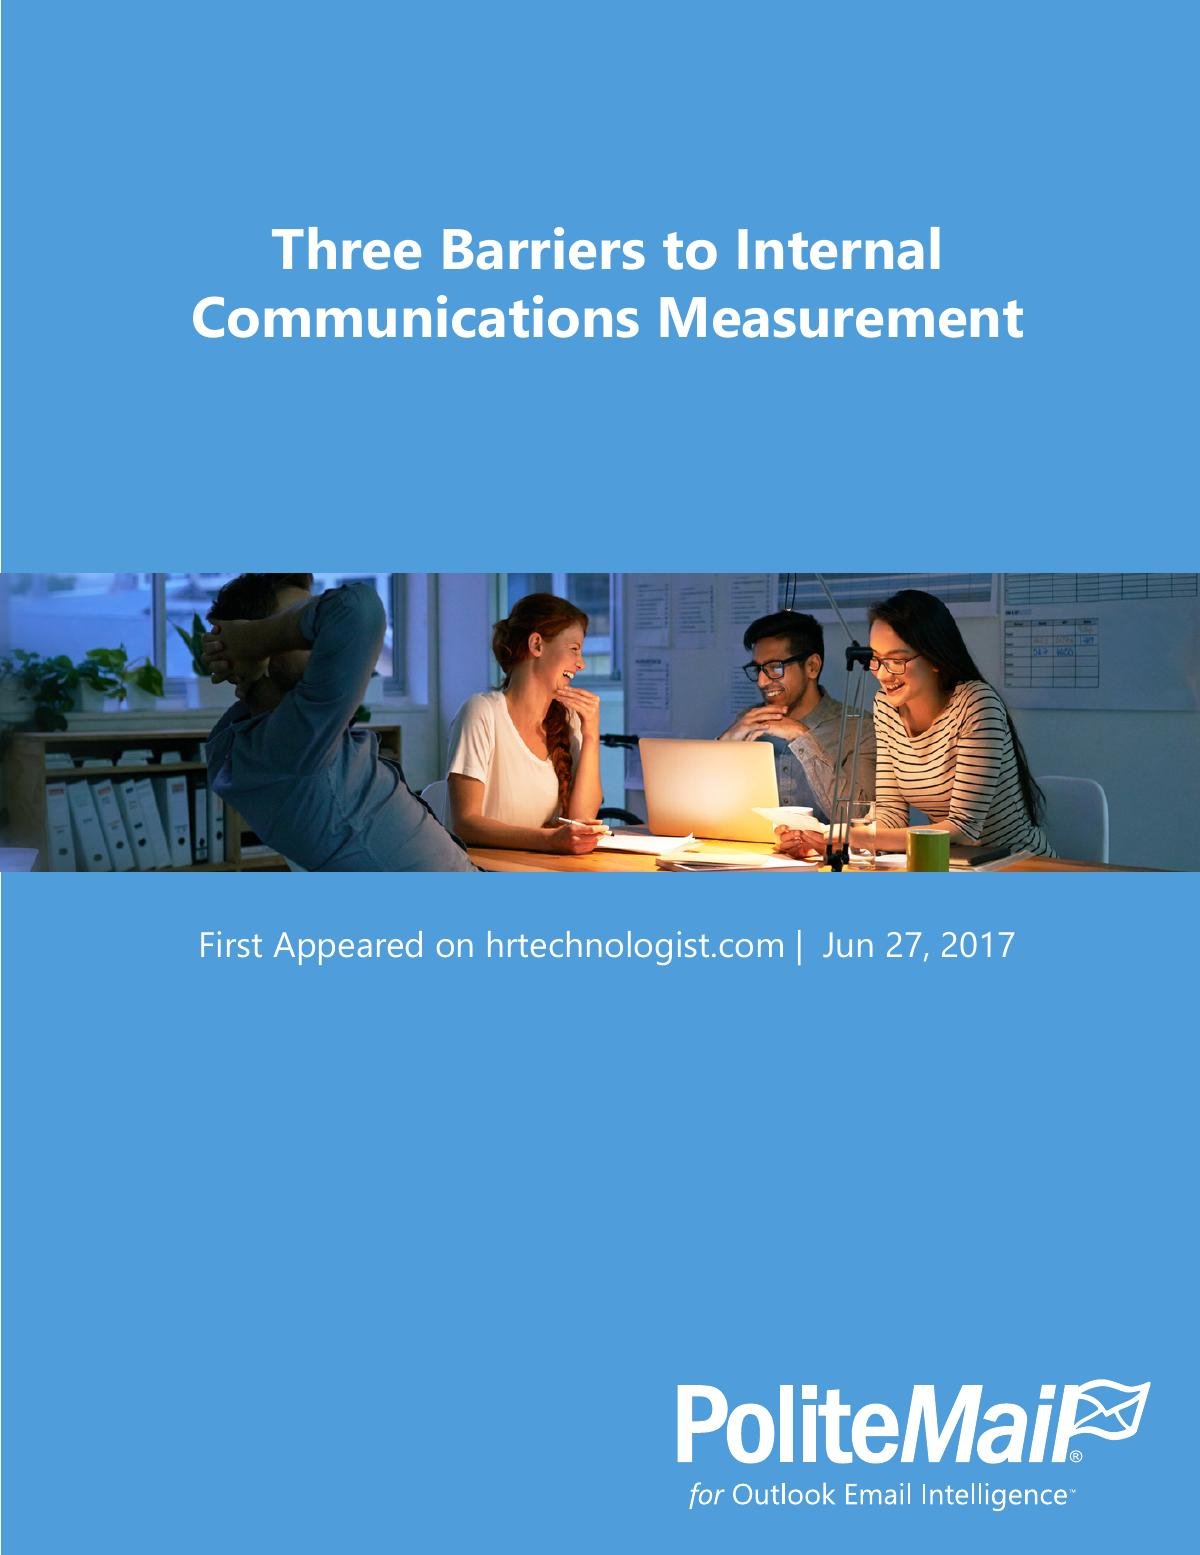 Three Barriers to Internal Communications Measurement